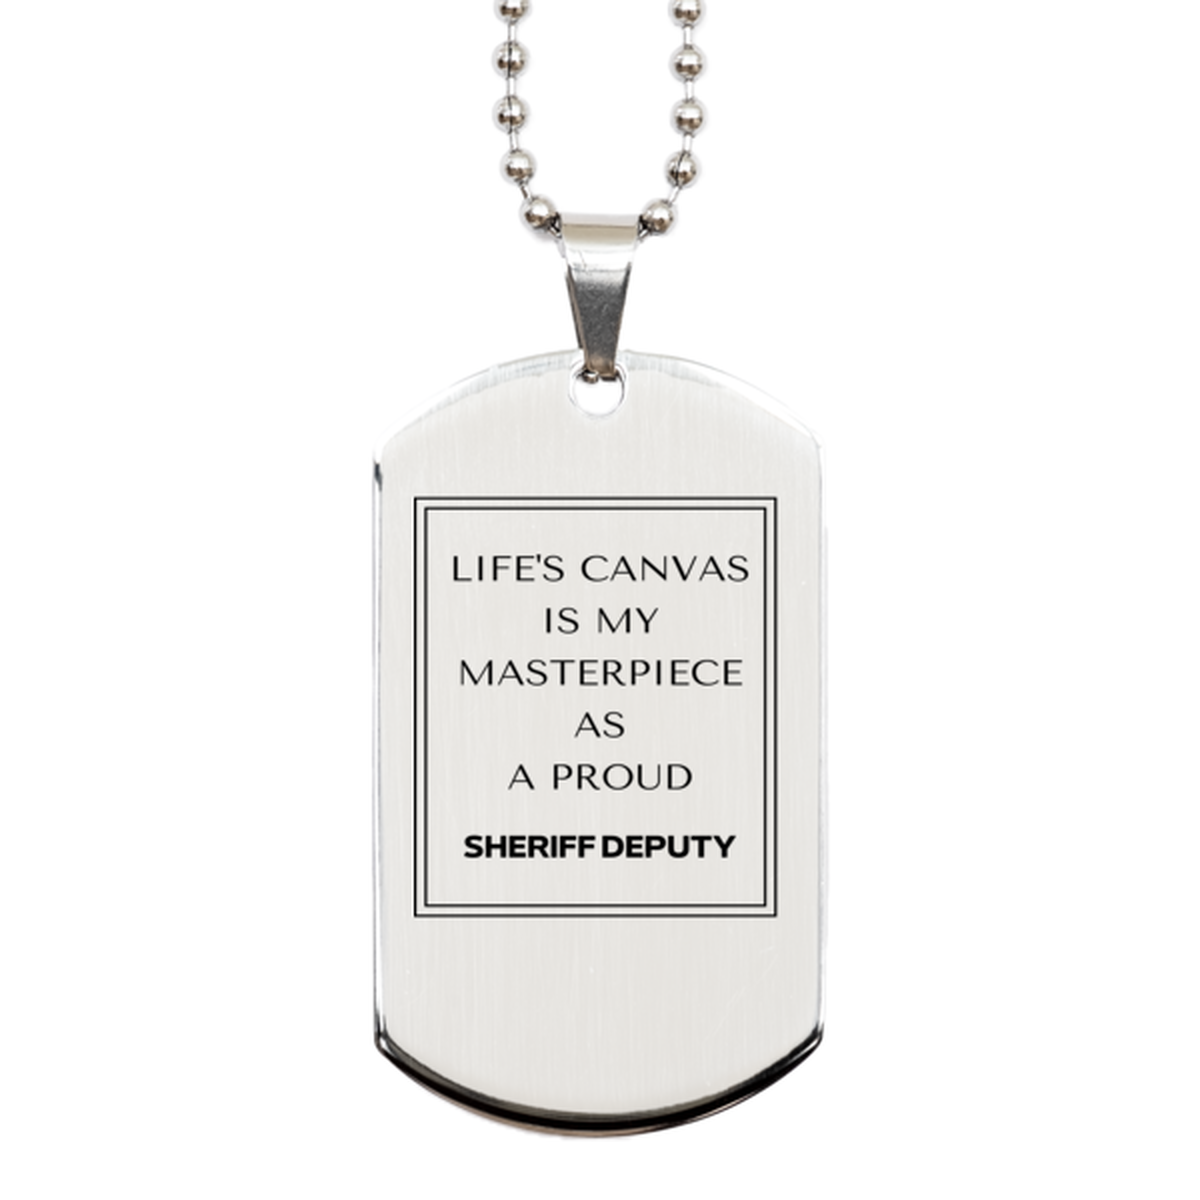 Proud Sheriff Deputy Gifts, Life's canvas is my masterpiece, Epic Birthday Christmas Unique Silver Dog Tag For Sheriff Deputy, Coworkers, Men, Women, Friends